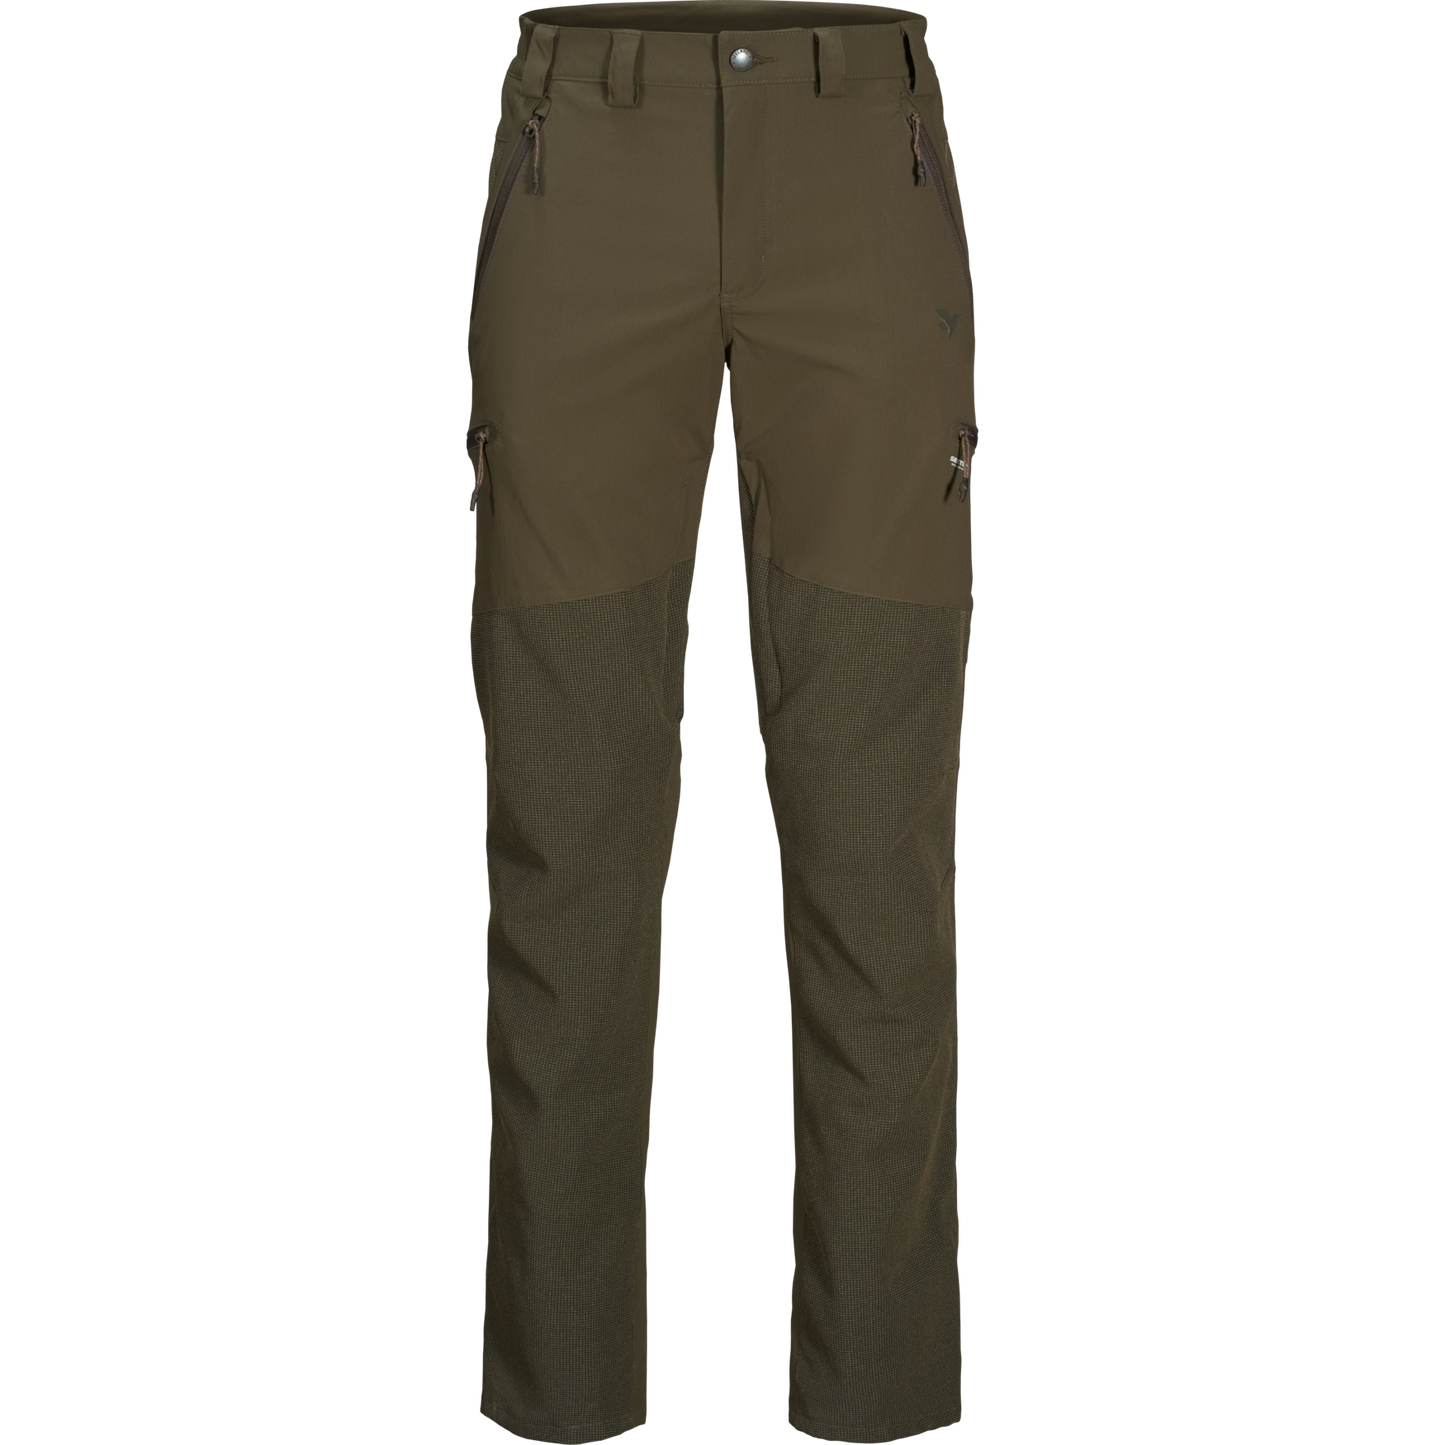 Outdoor Membrane Trousers